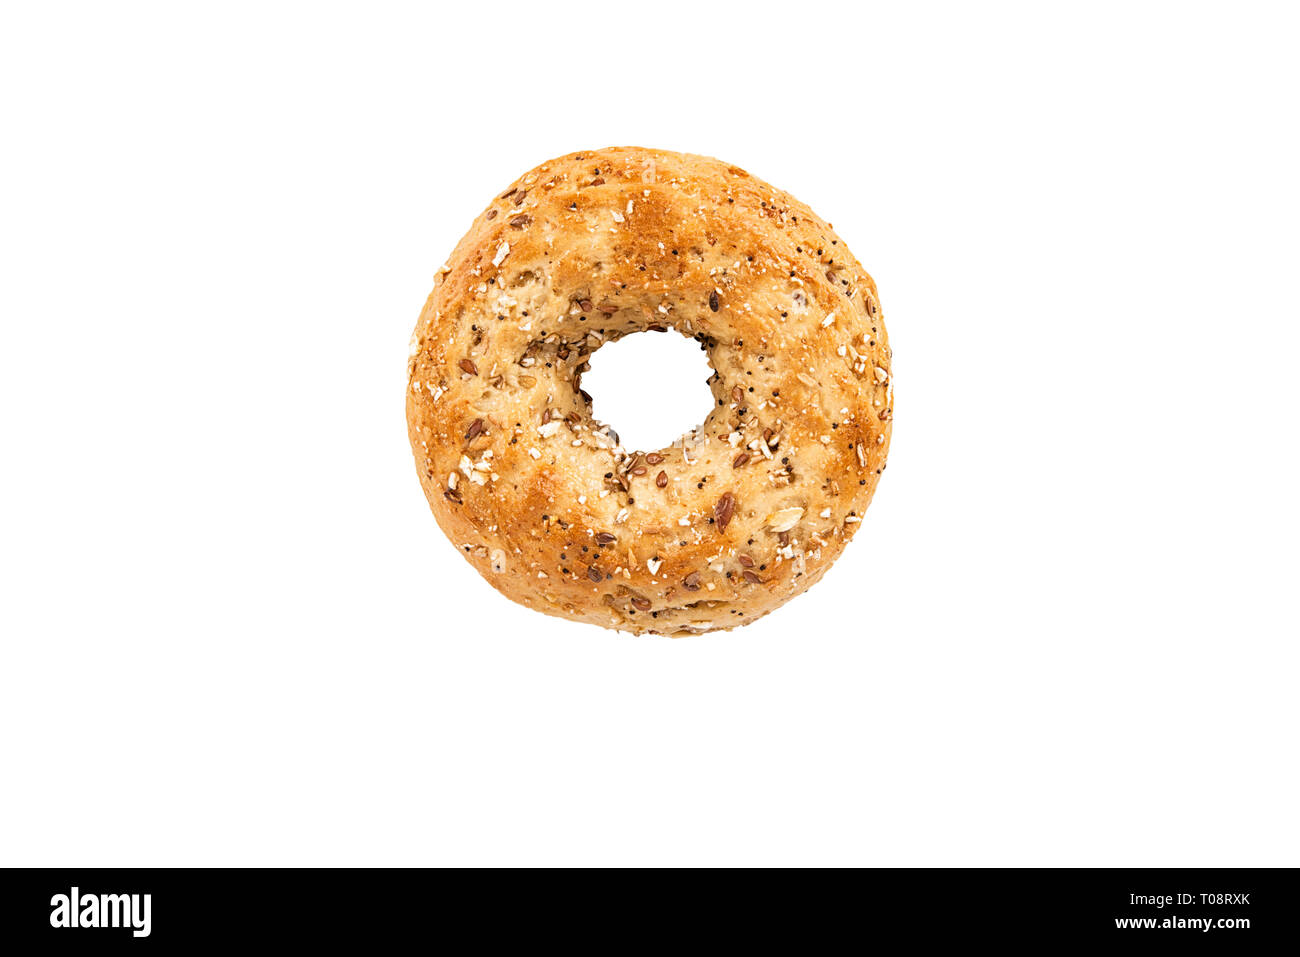 Multi-grain bagel bread, directly above. Isolated on white background. Stock Photo